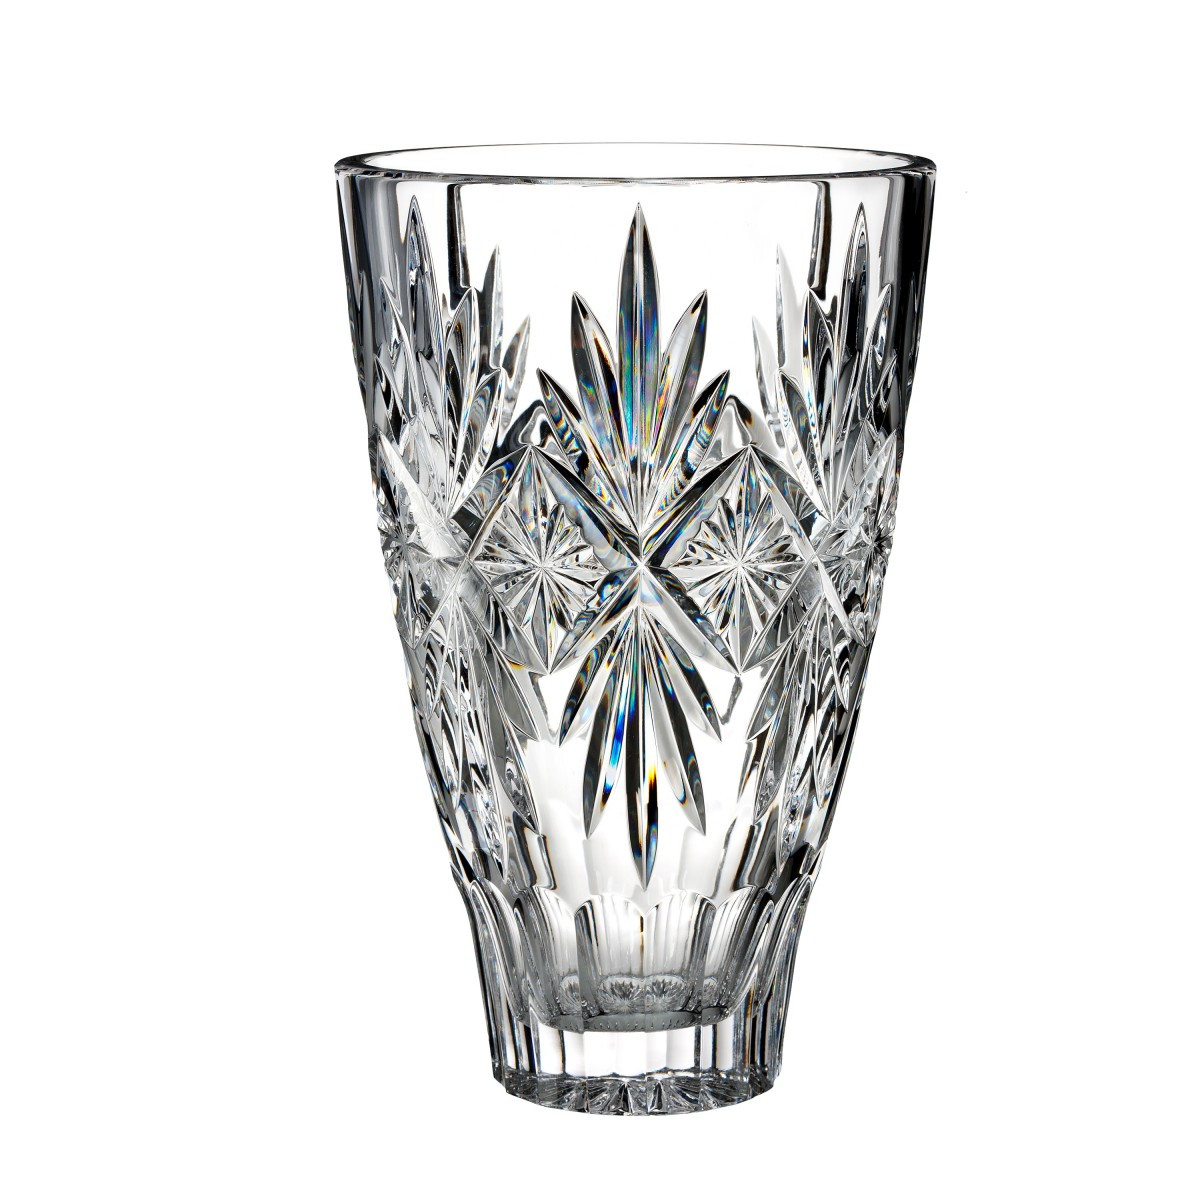 13 Lovable Waterford Marquis Markham Vase 2024 free download waterford marquis markham vase of normandy vase discontinued waterford us intended for normandy vase discontinued